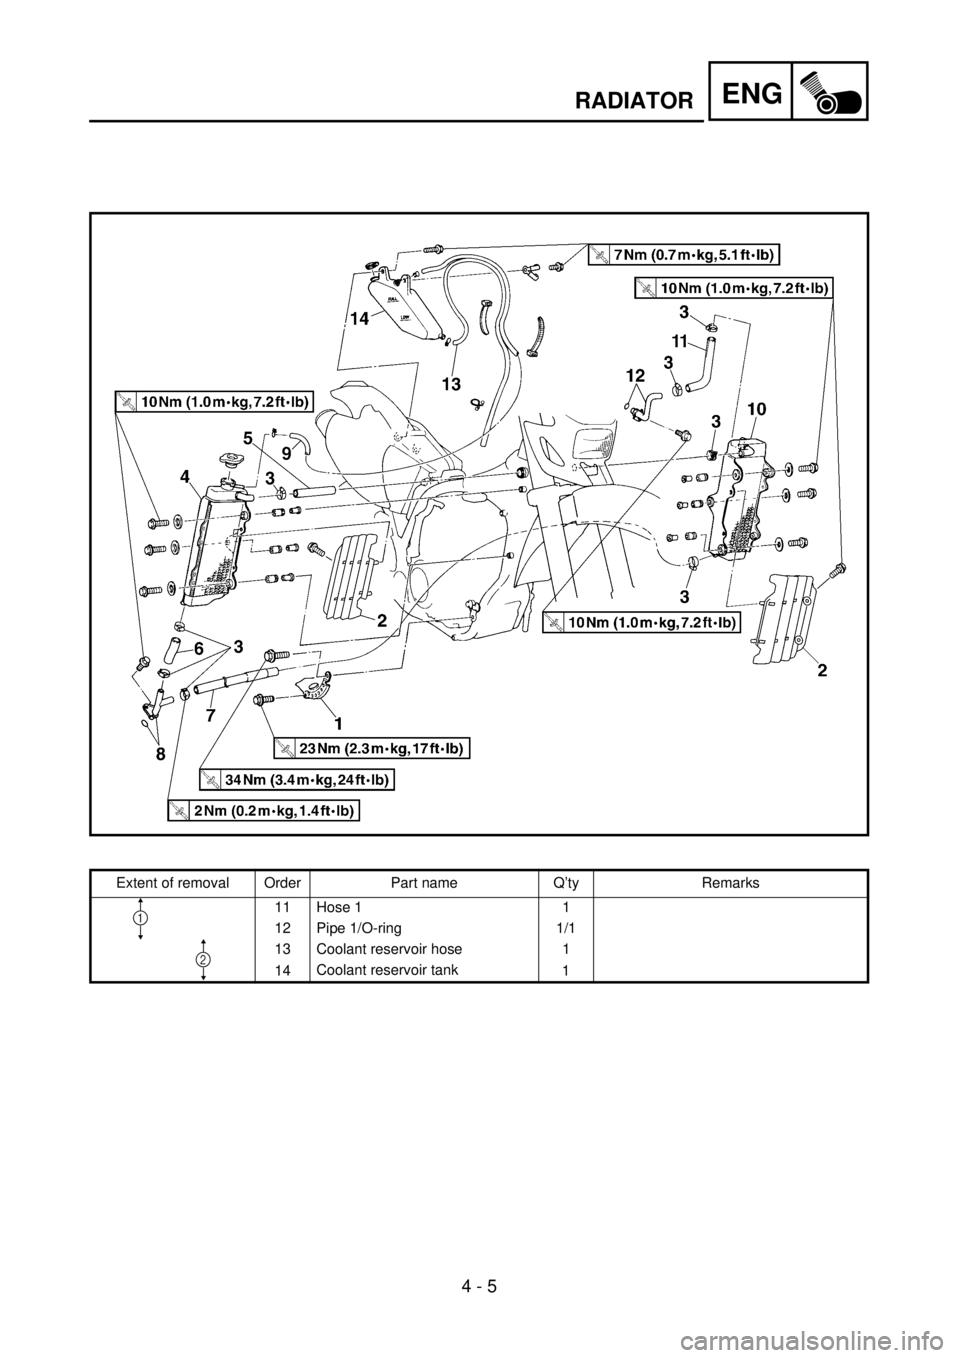 YAMAHA WR 426F 2001  Manuale duso (in Italian) ENG
 
4 - 5 
RADIATOR 
Extent of removal Order Part name Q’ty Remarks
11 Hose 1 1
12 Pipe 1/O-ring 1/1
13 Coolant reservoir hose 1
14Coolant reservoir tank
1
2
1 